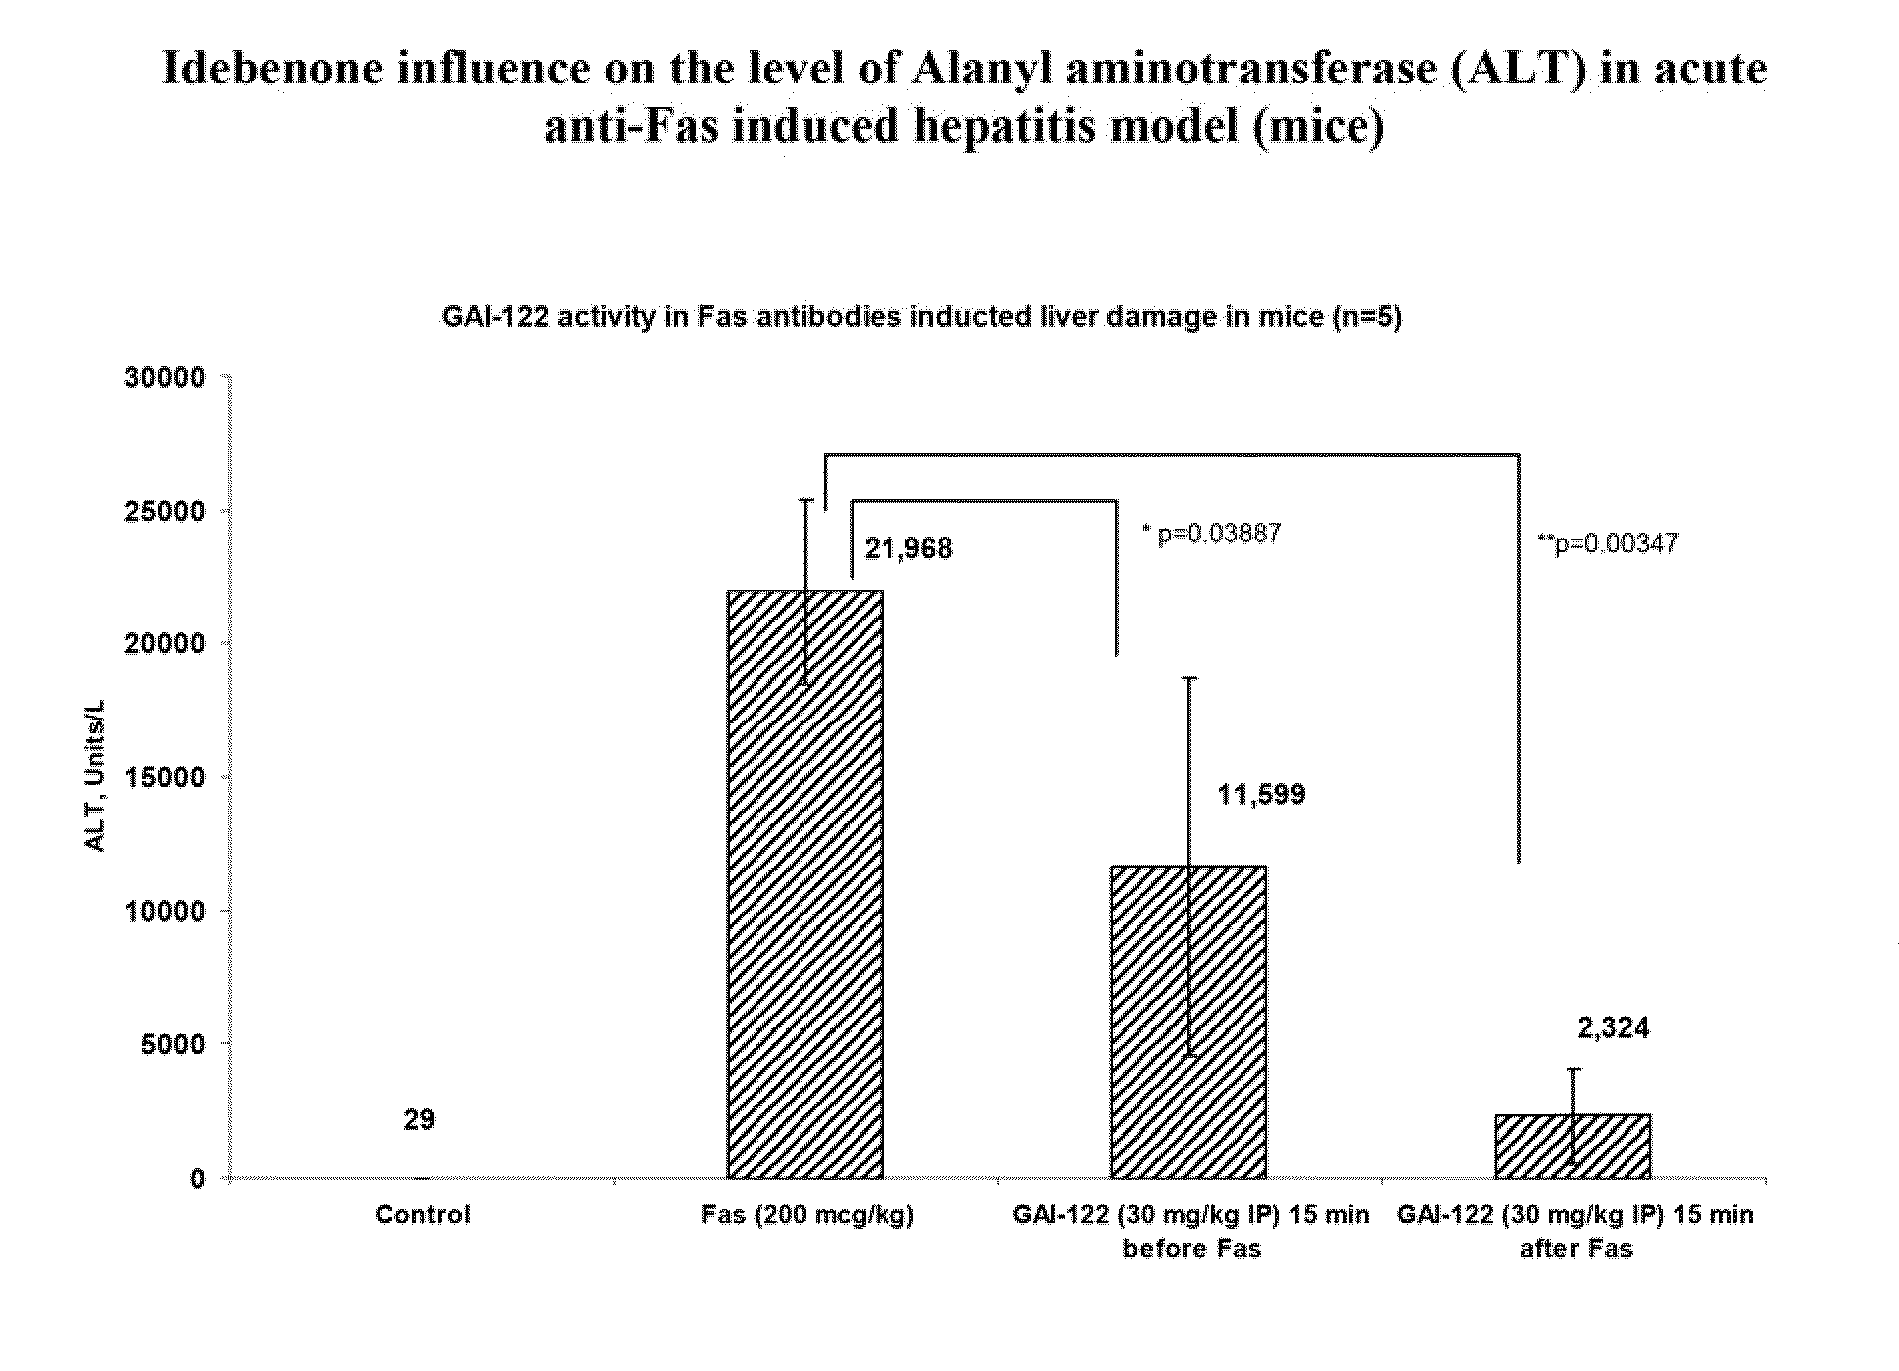 Pharmaceutical composition containing idebenone for the treatment of liver disorders